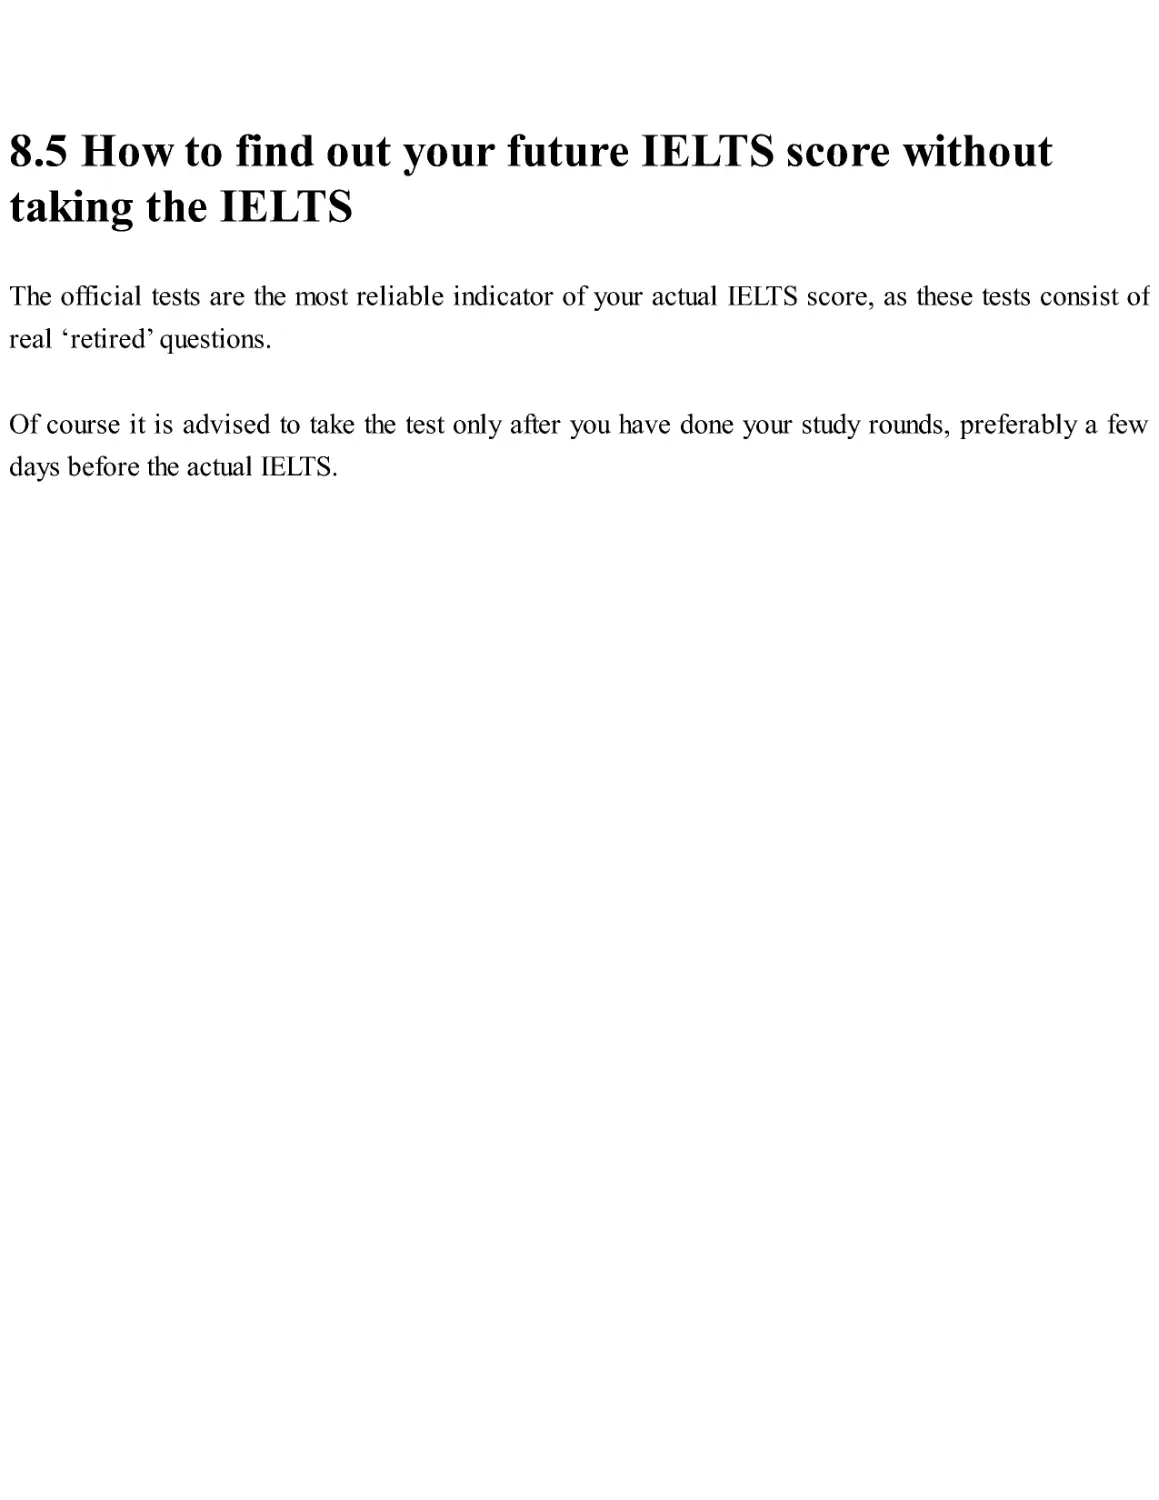 8.5 How to find out your future IELTS score without taking the IELTS